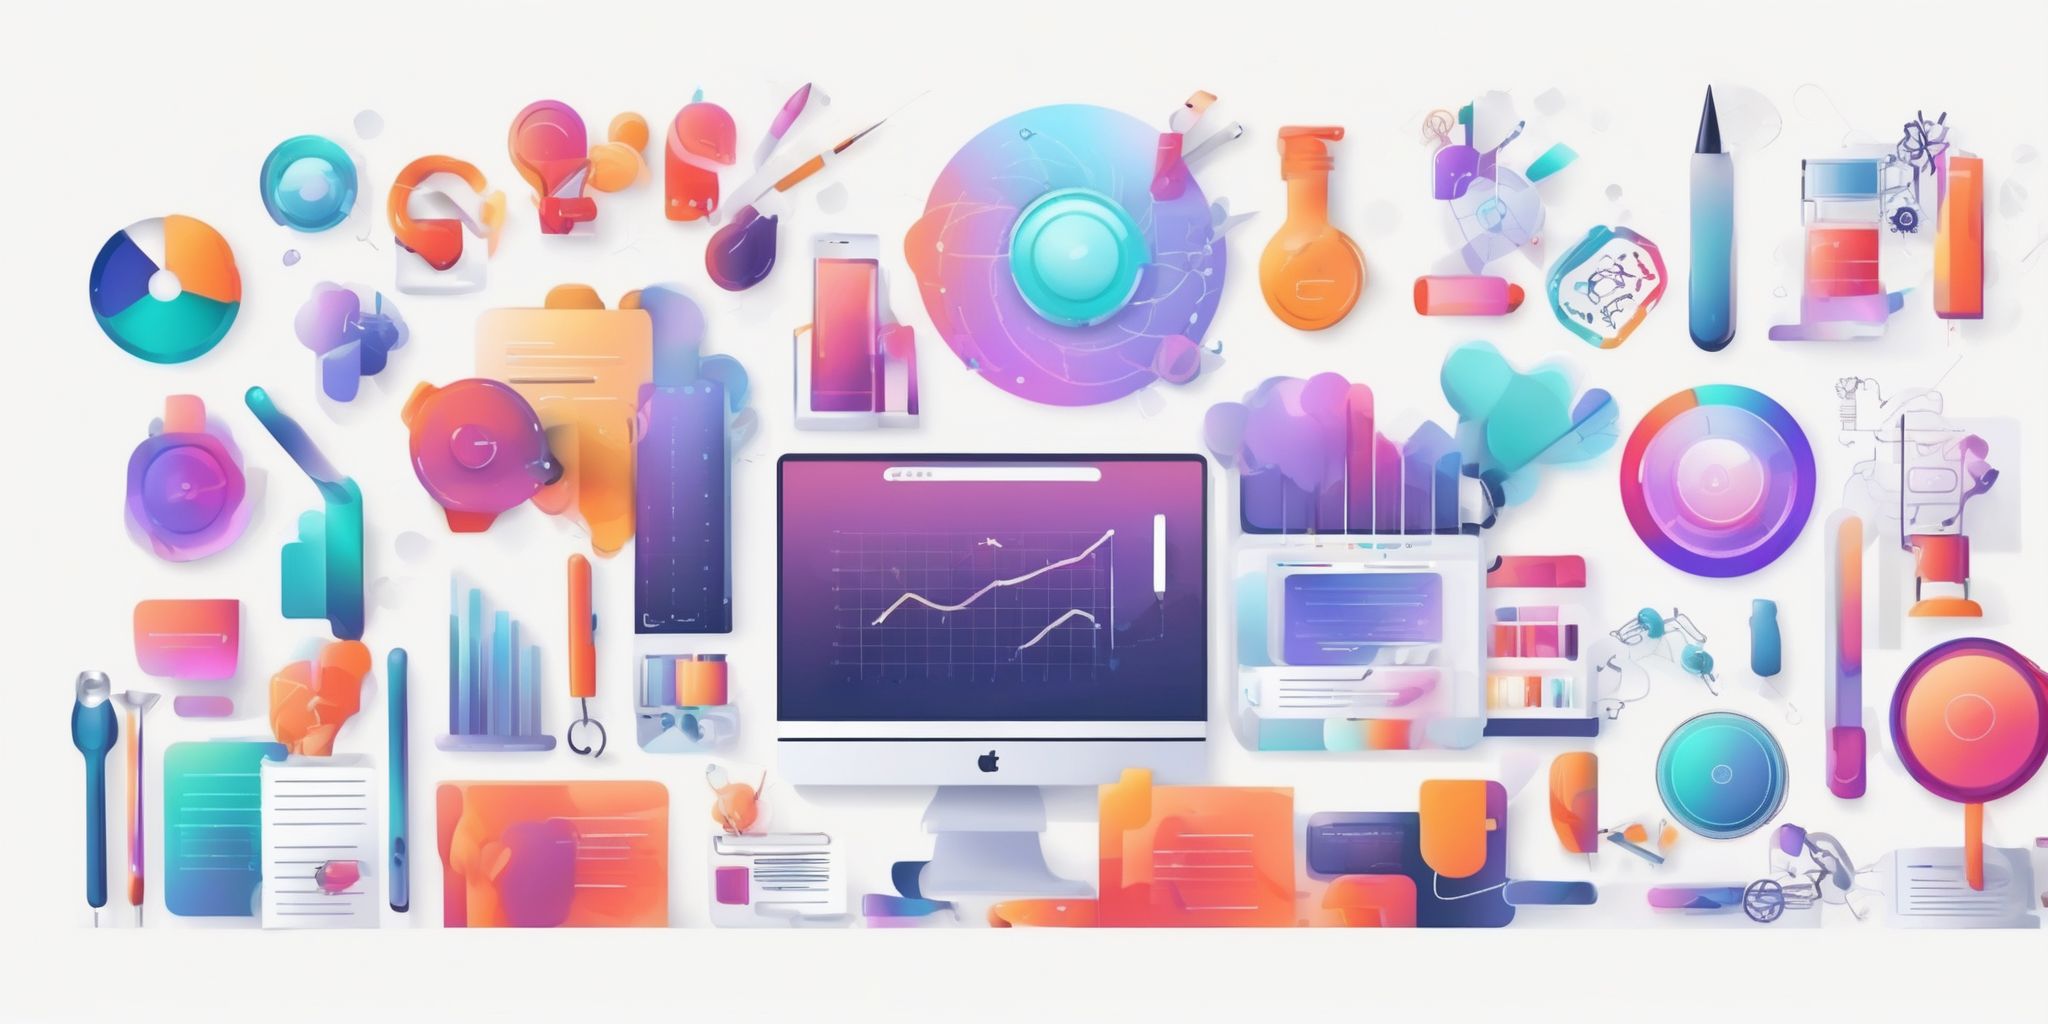 Marketing tools in illustration style with gradients and white background